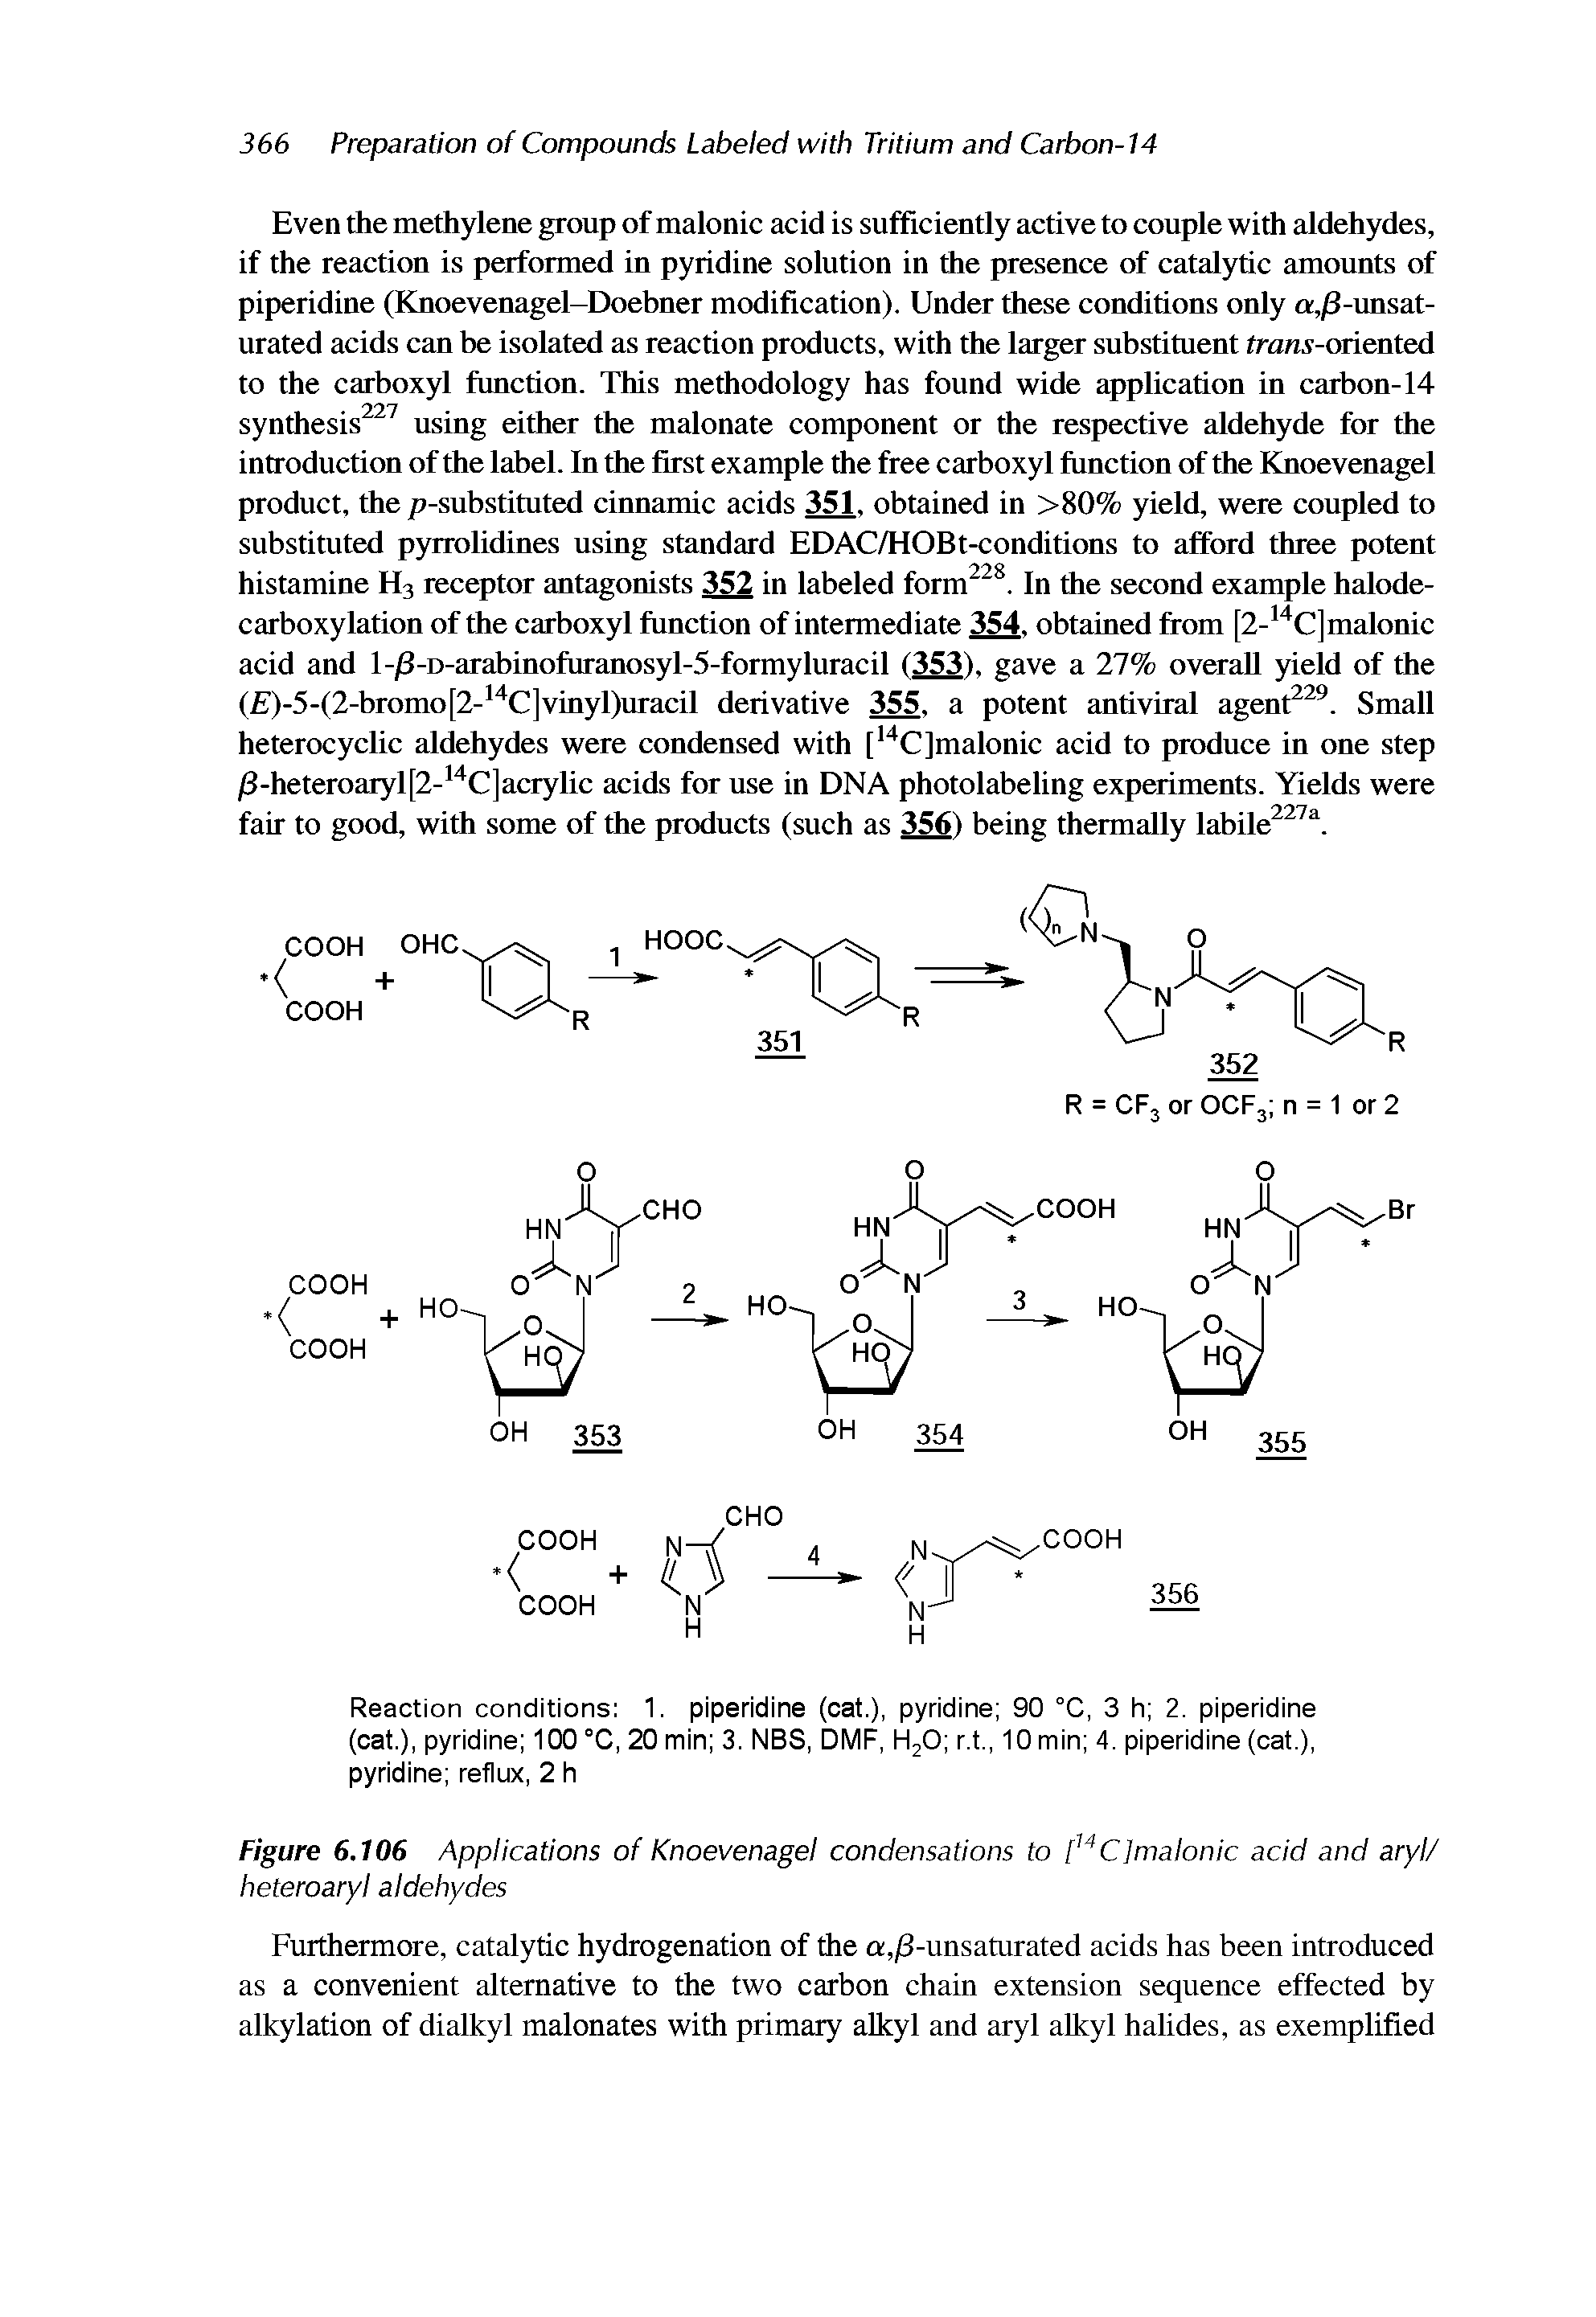 Figure 6.106 Applications of Knoevenagel condensations to [ Clmalonic acid and aryl/ heteroaryl aldehydes...